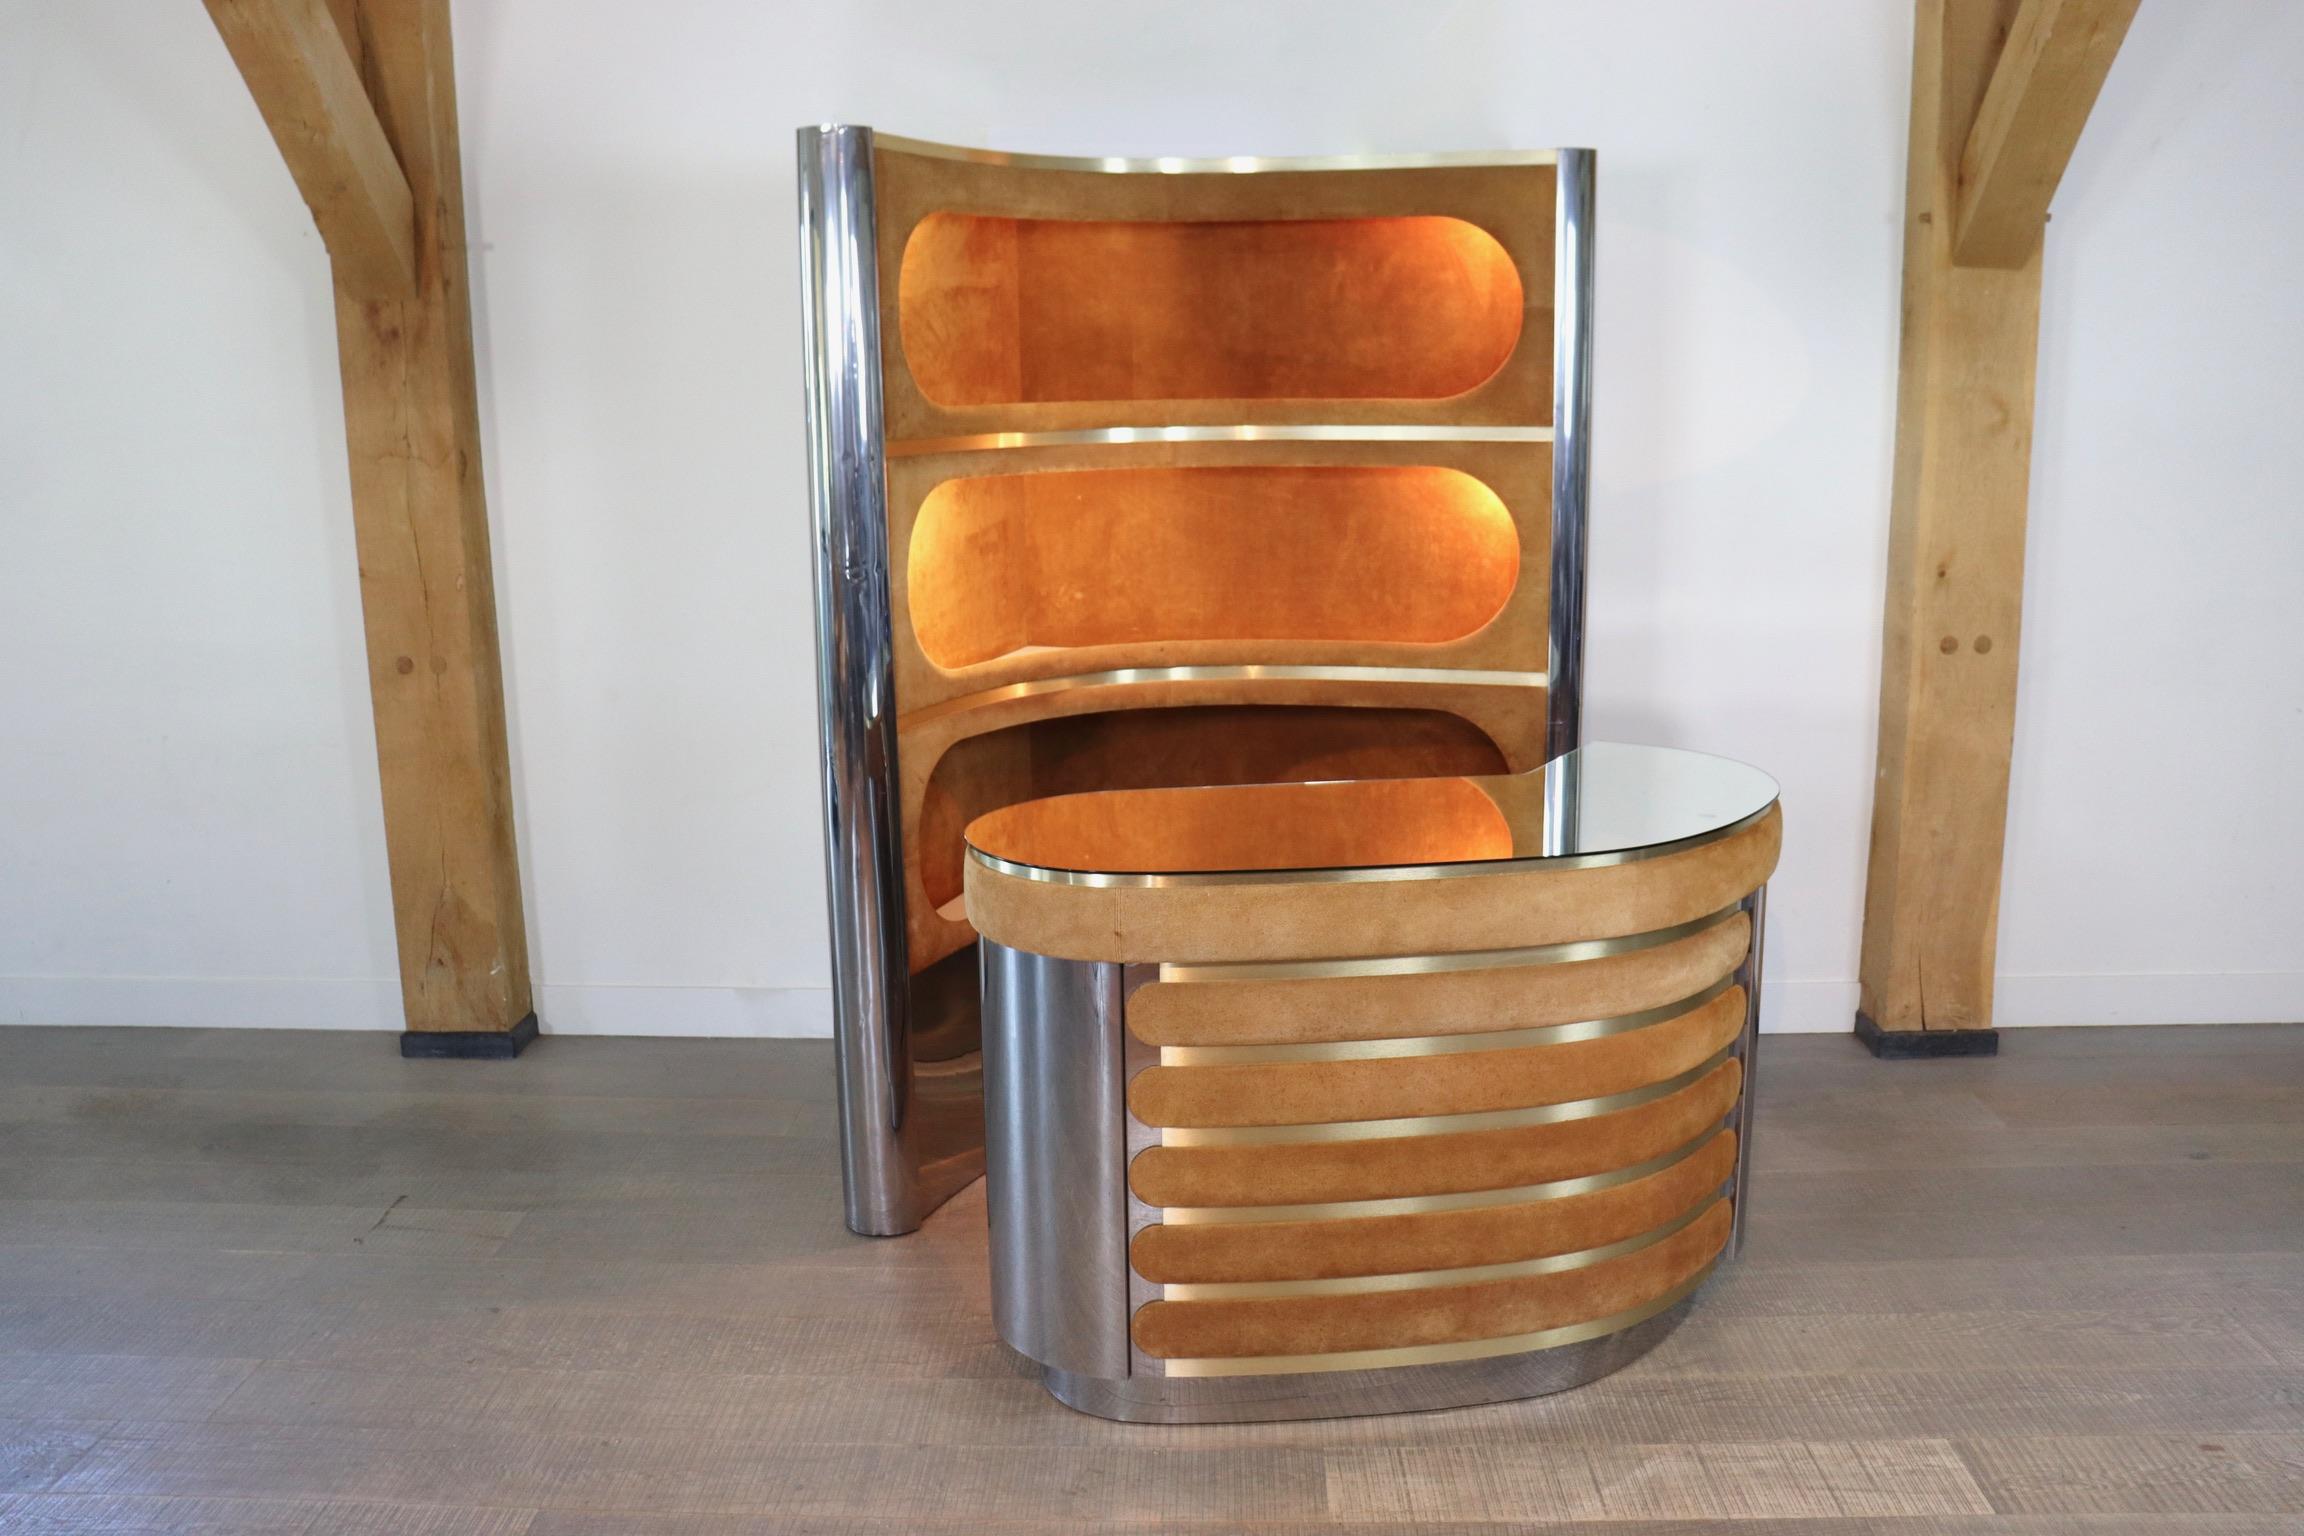 Incredible suede and chrome bar by Willy Rizzo 1970s. With original mirror counter, working lights and original refrigerator. With this bar, any room will be elevated to a classy and luxurious space. Pour yourself a cold drink and enjoy the night